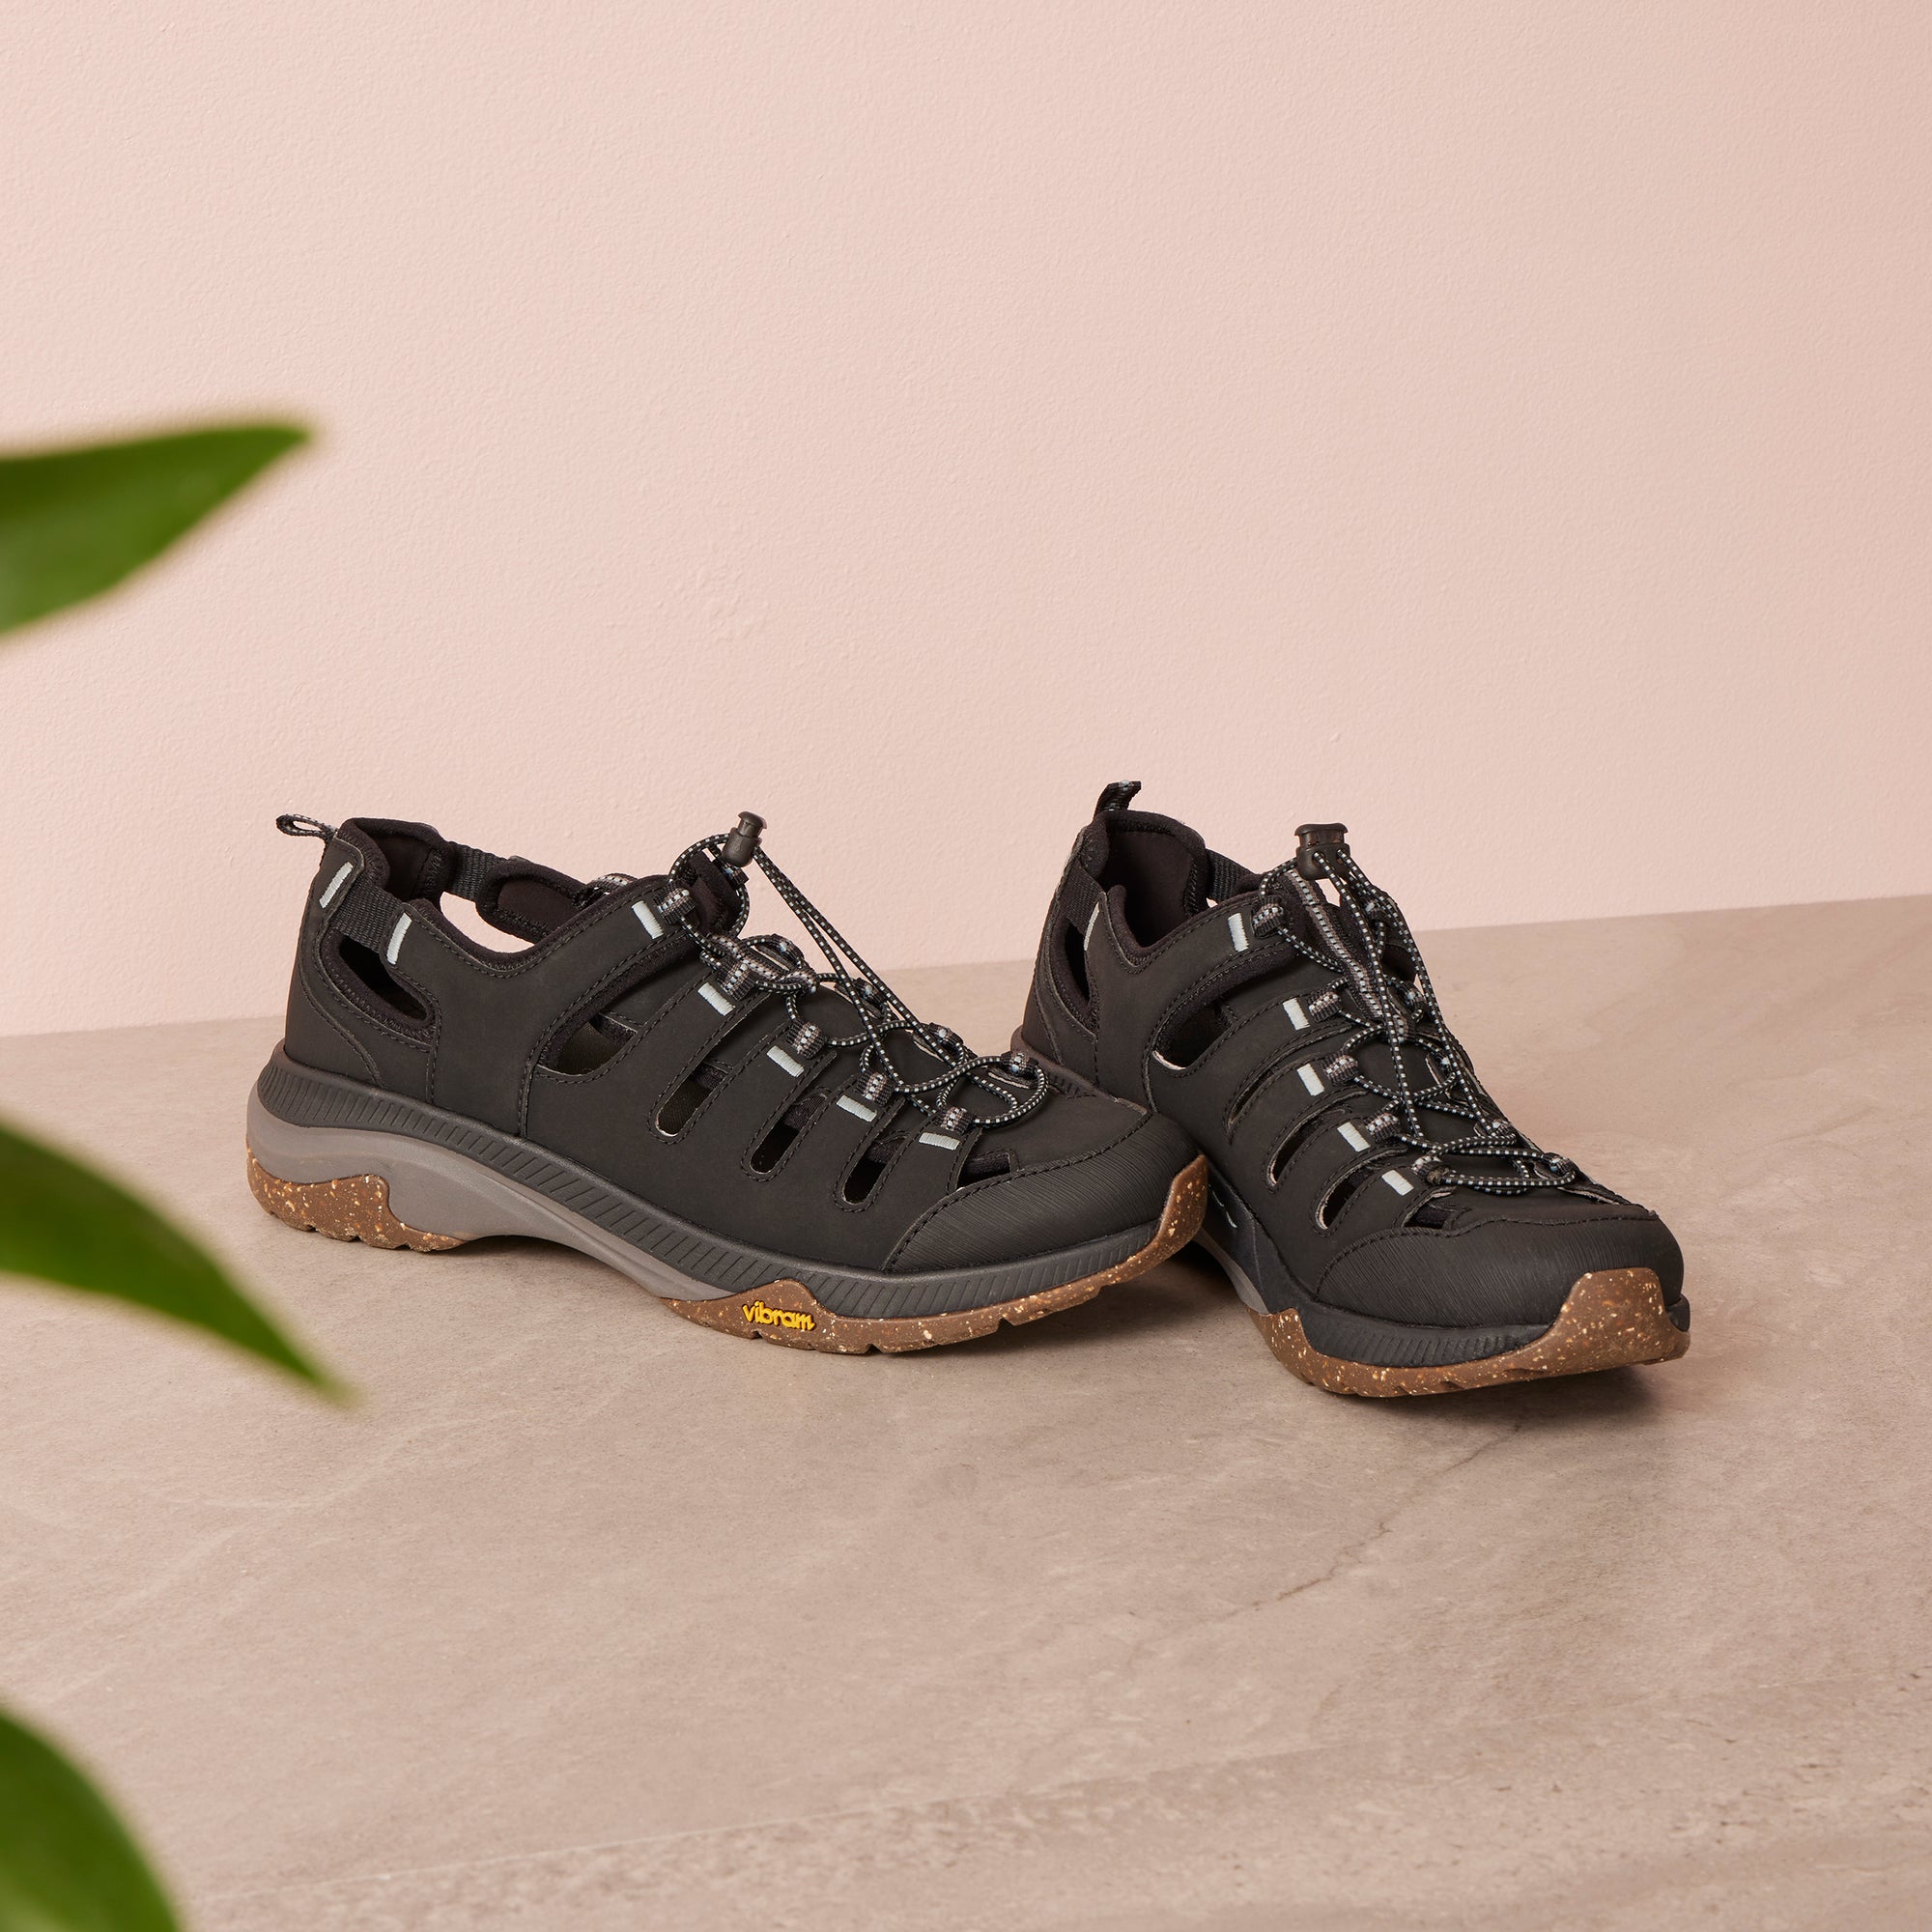 A black sandal sneaker with a durable Vibram rubber outsole.